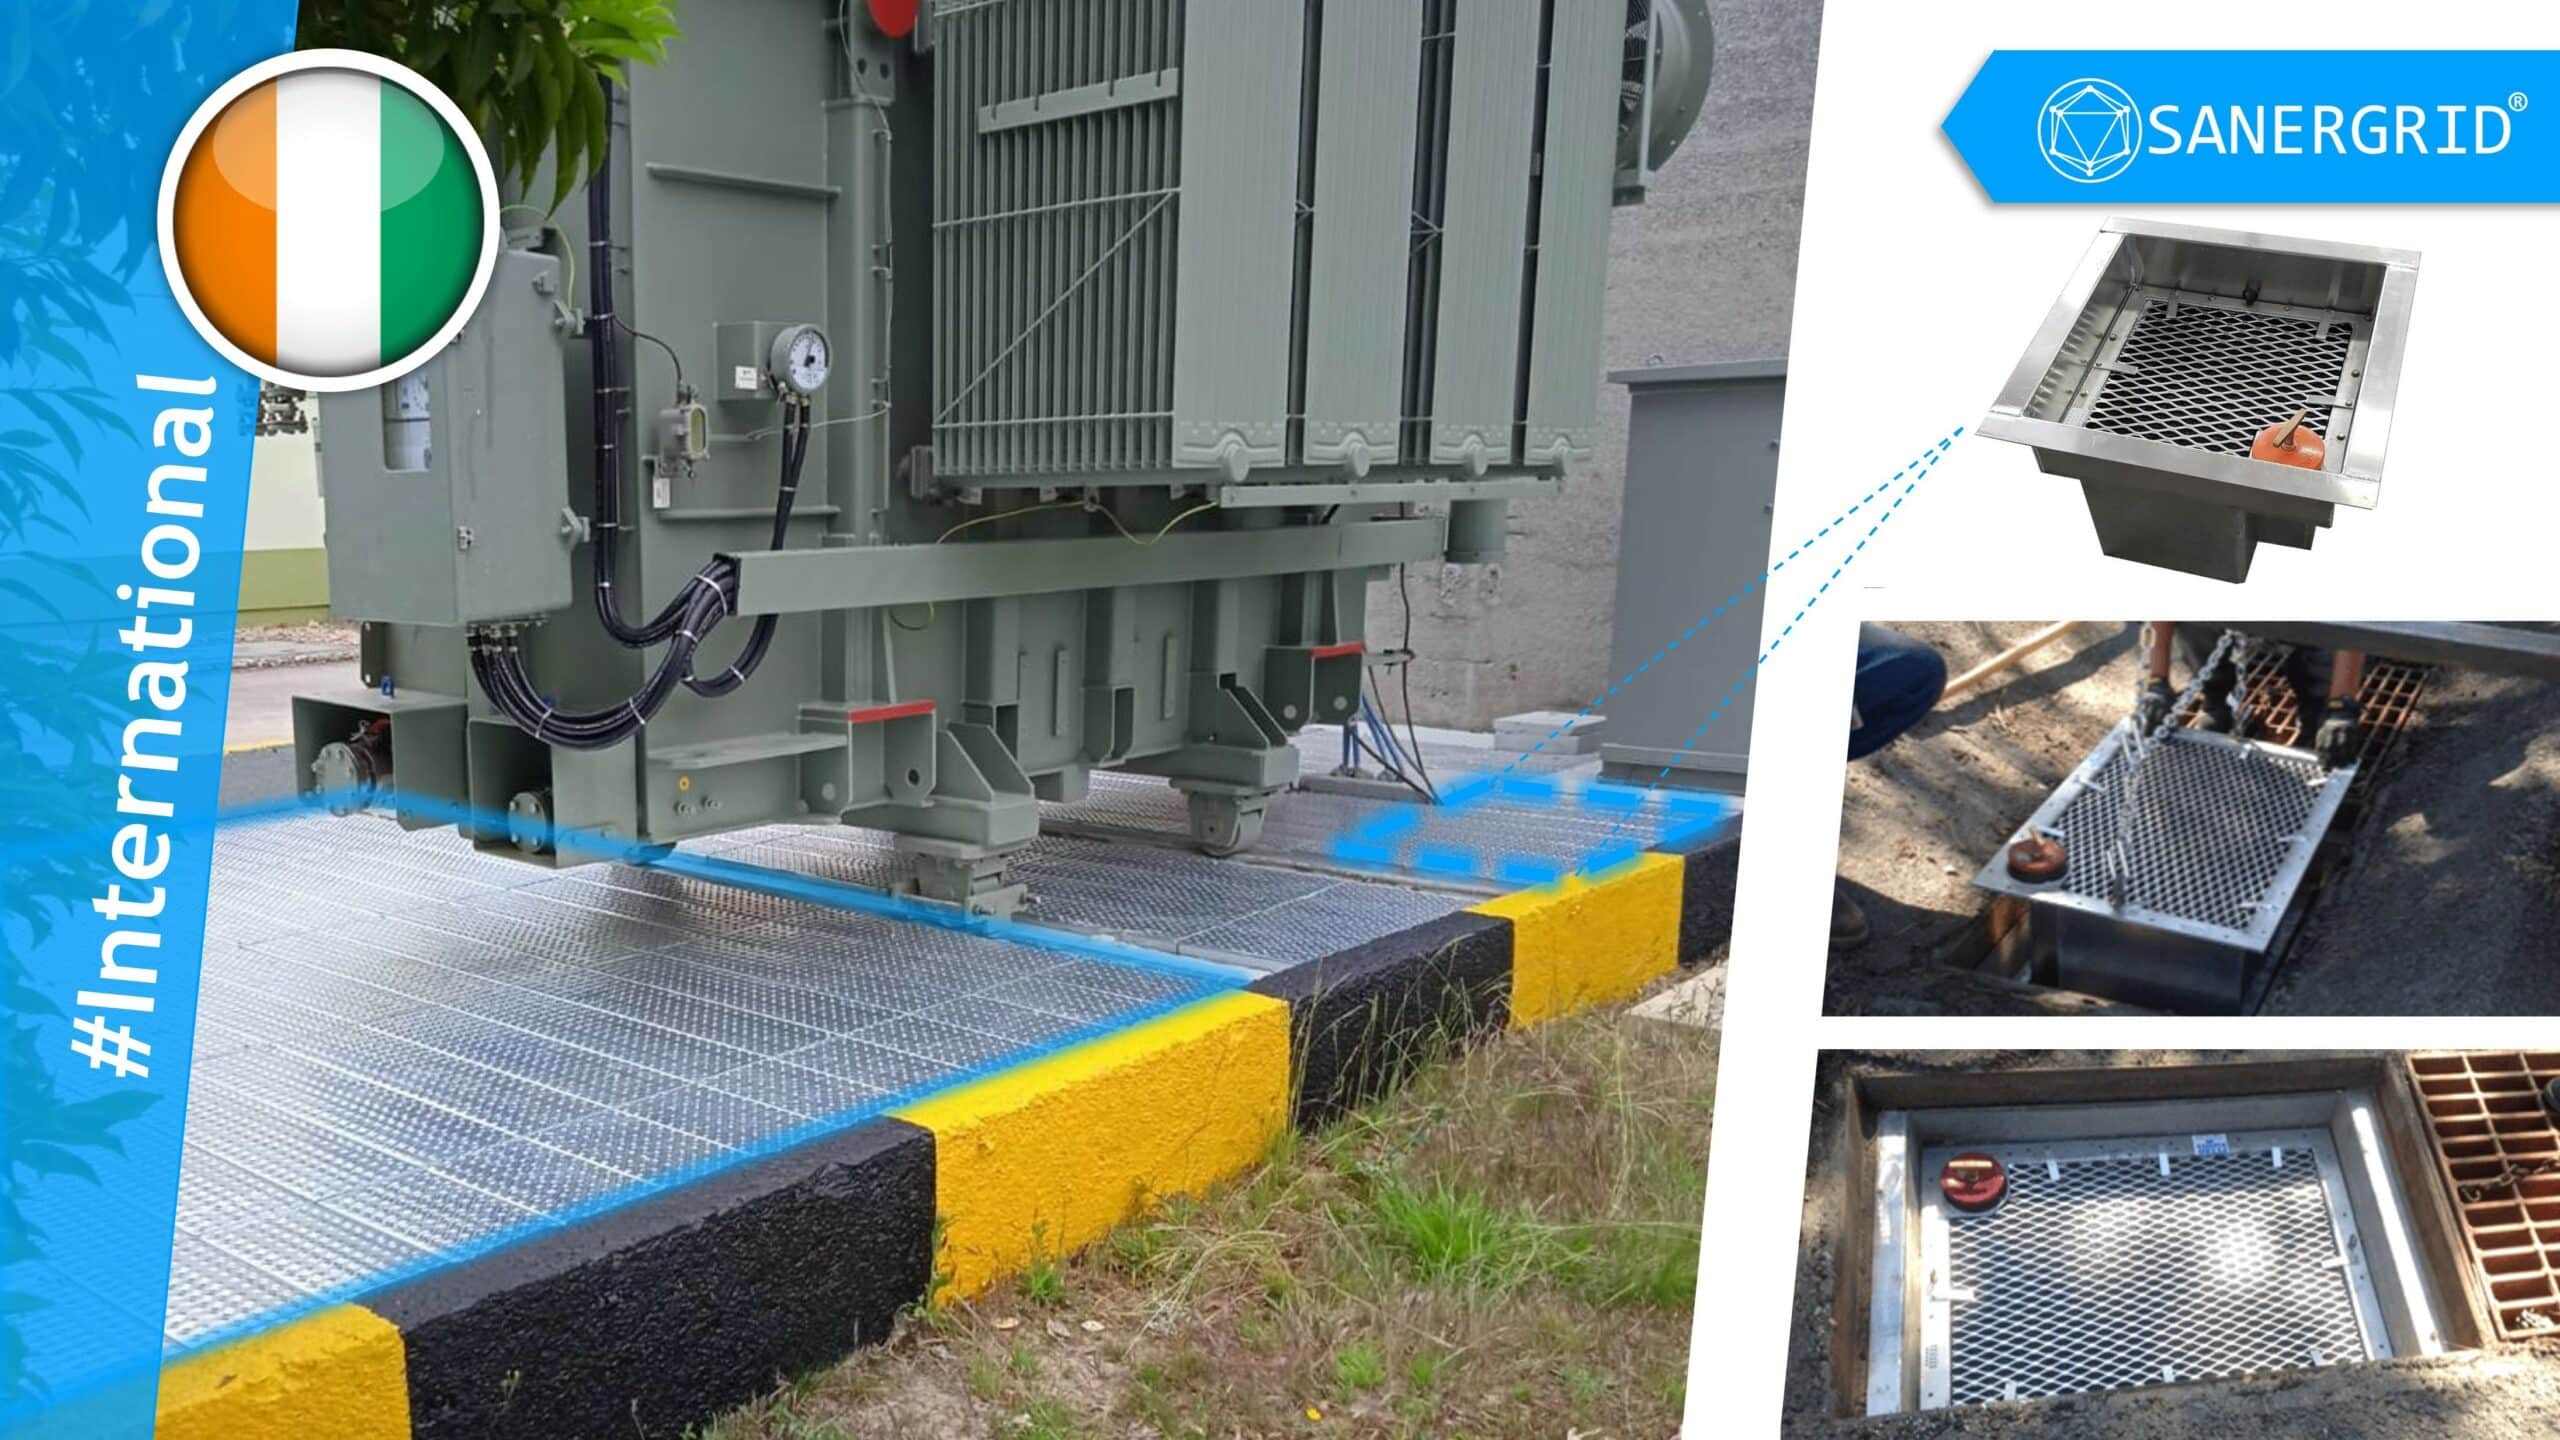 Installation of a complete extinguishing system for PcP EXTICOV LHD electrical transformer pits and an autonomous treatment unit for hydrocarbon-polluted rainwater.